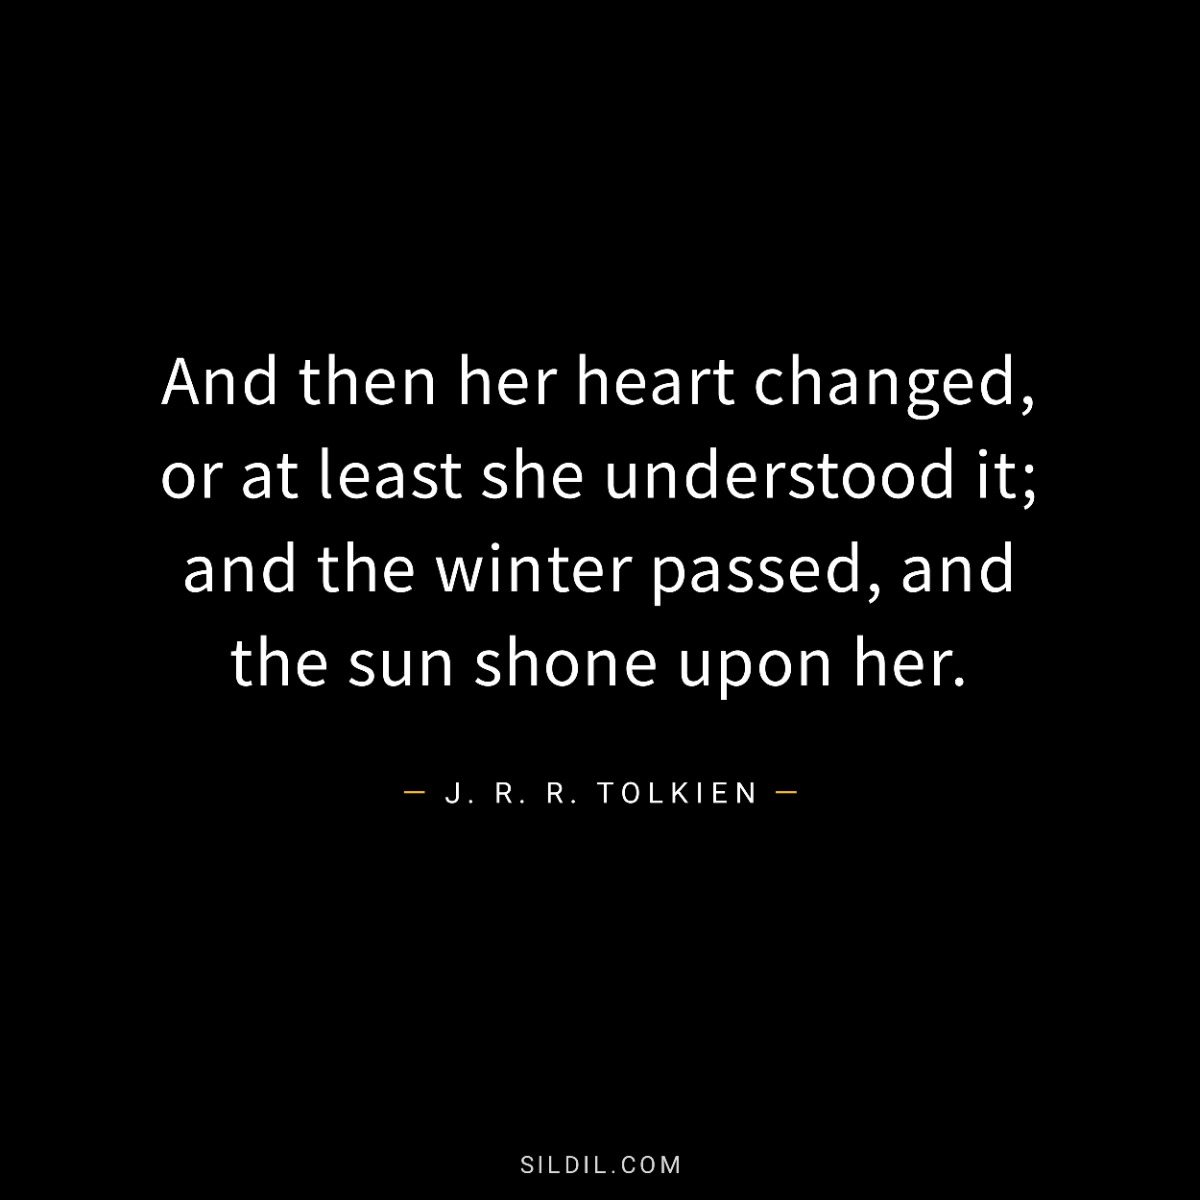 And then her heart changed, or at least she understood it; and the winter passed, and the sun shone upon her.